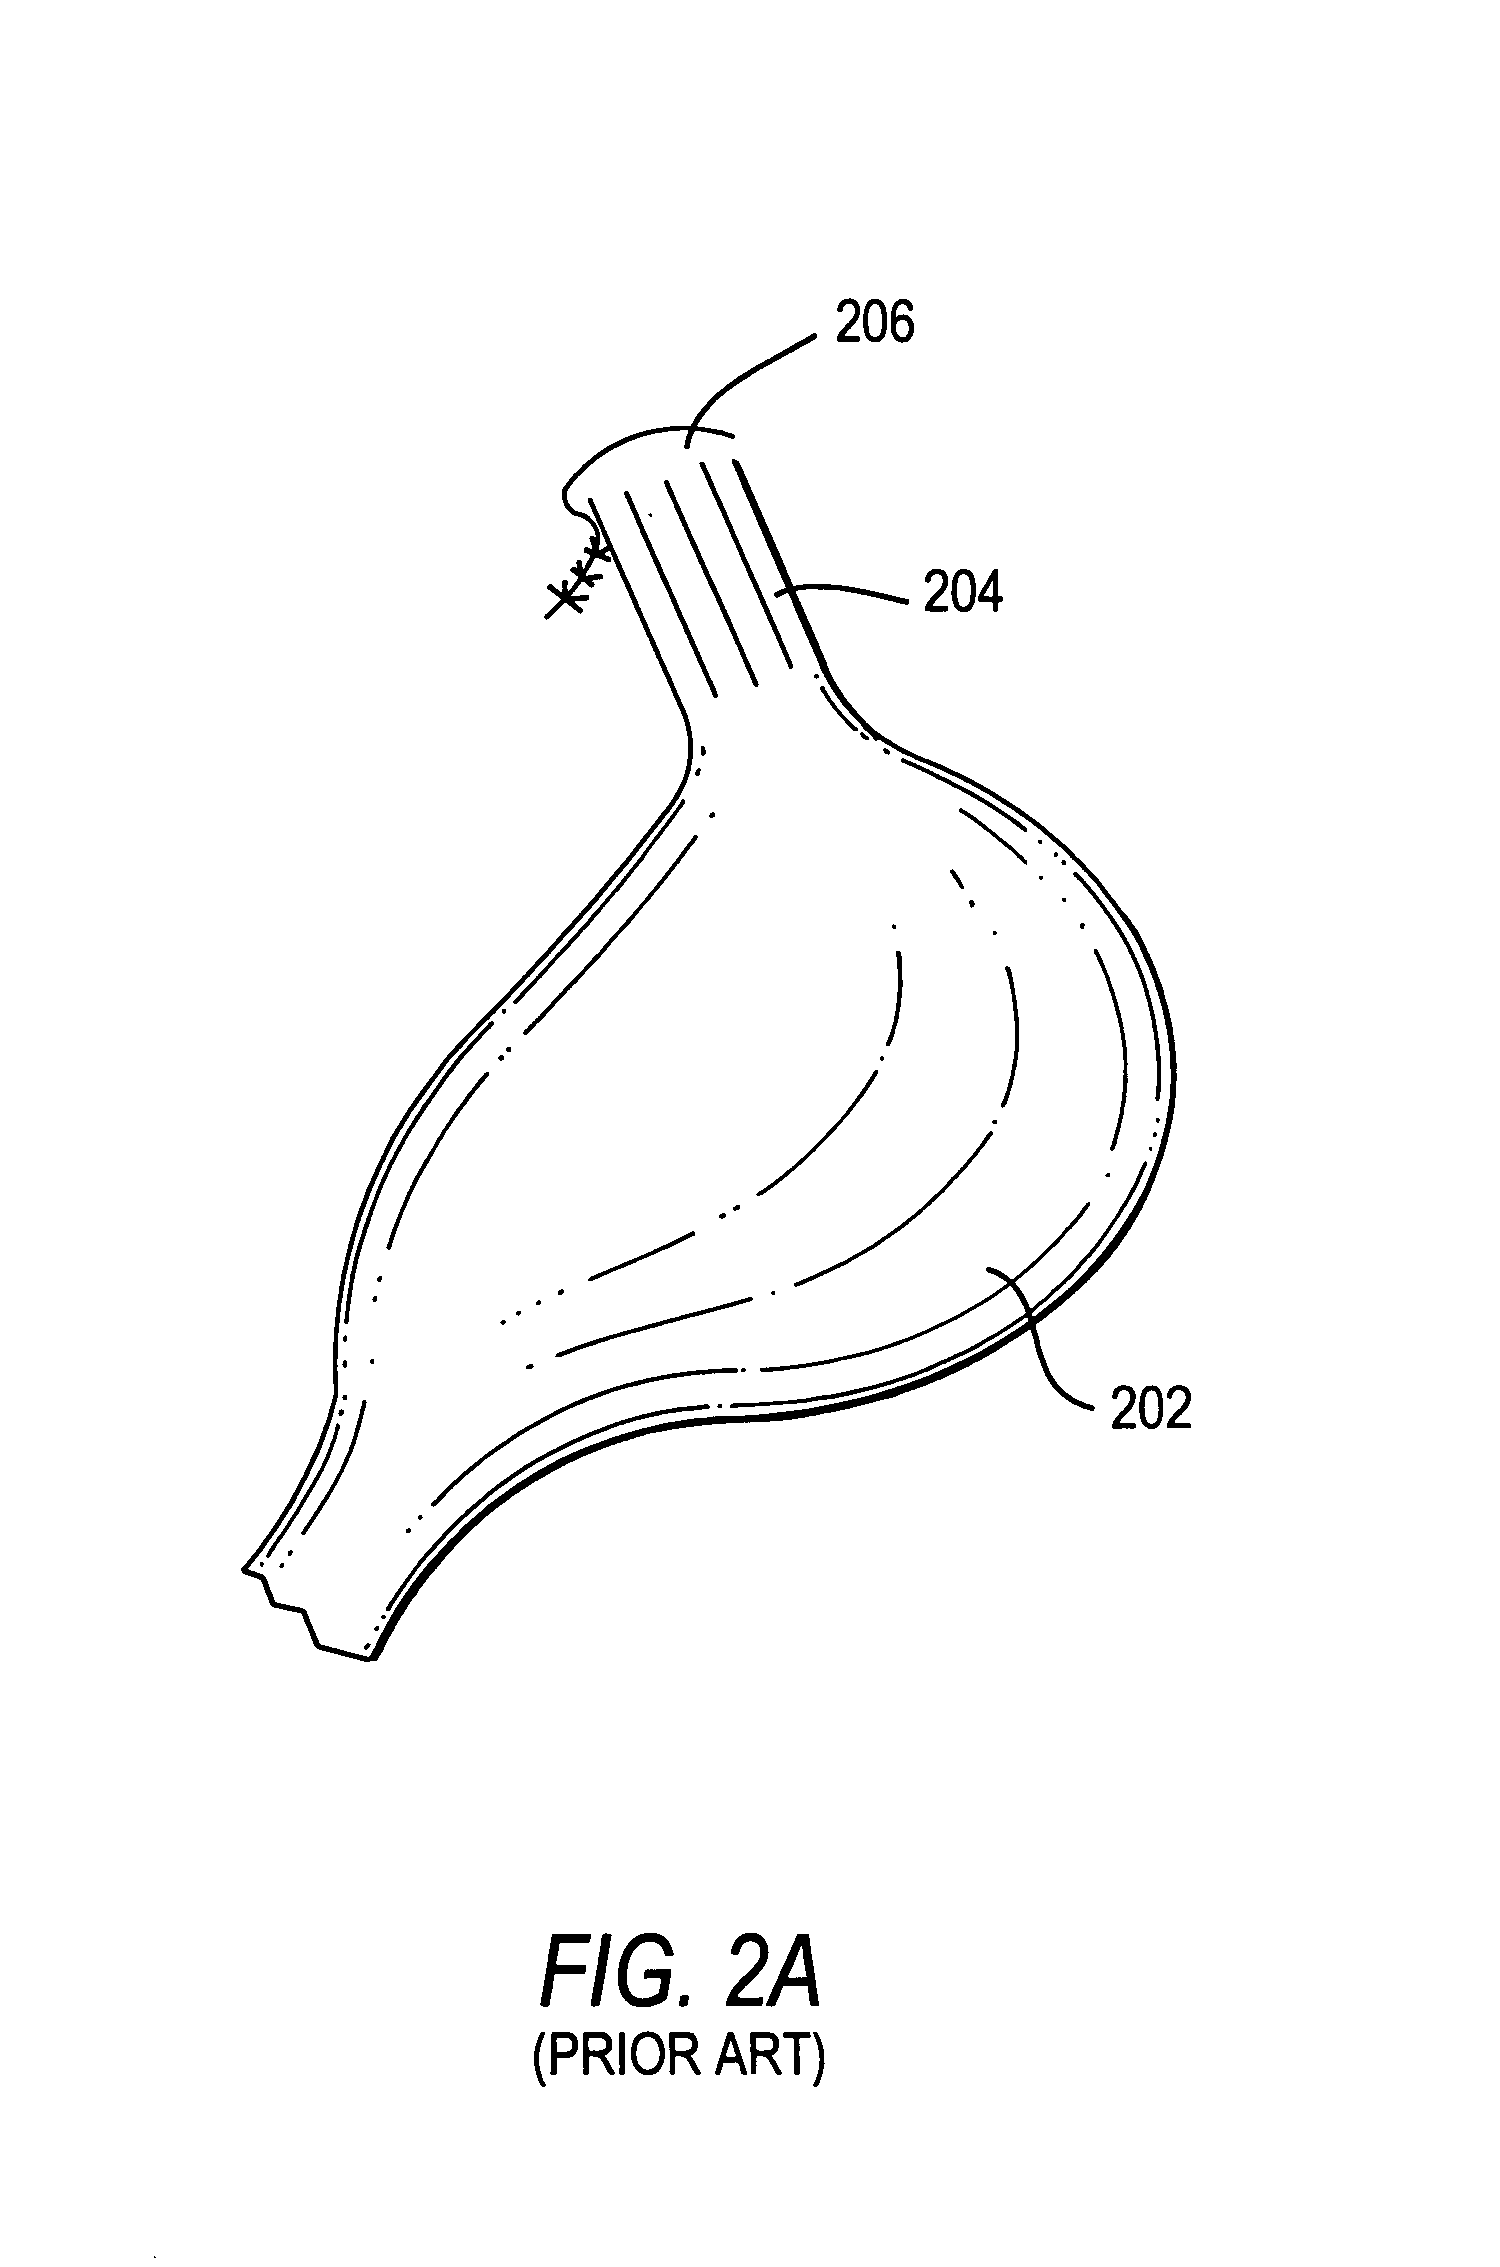 Methods and apparatus for improving the function of biological passages